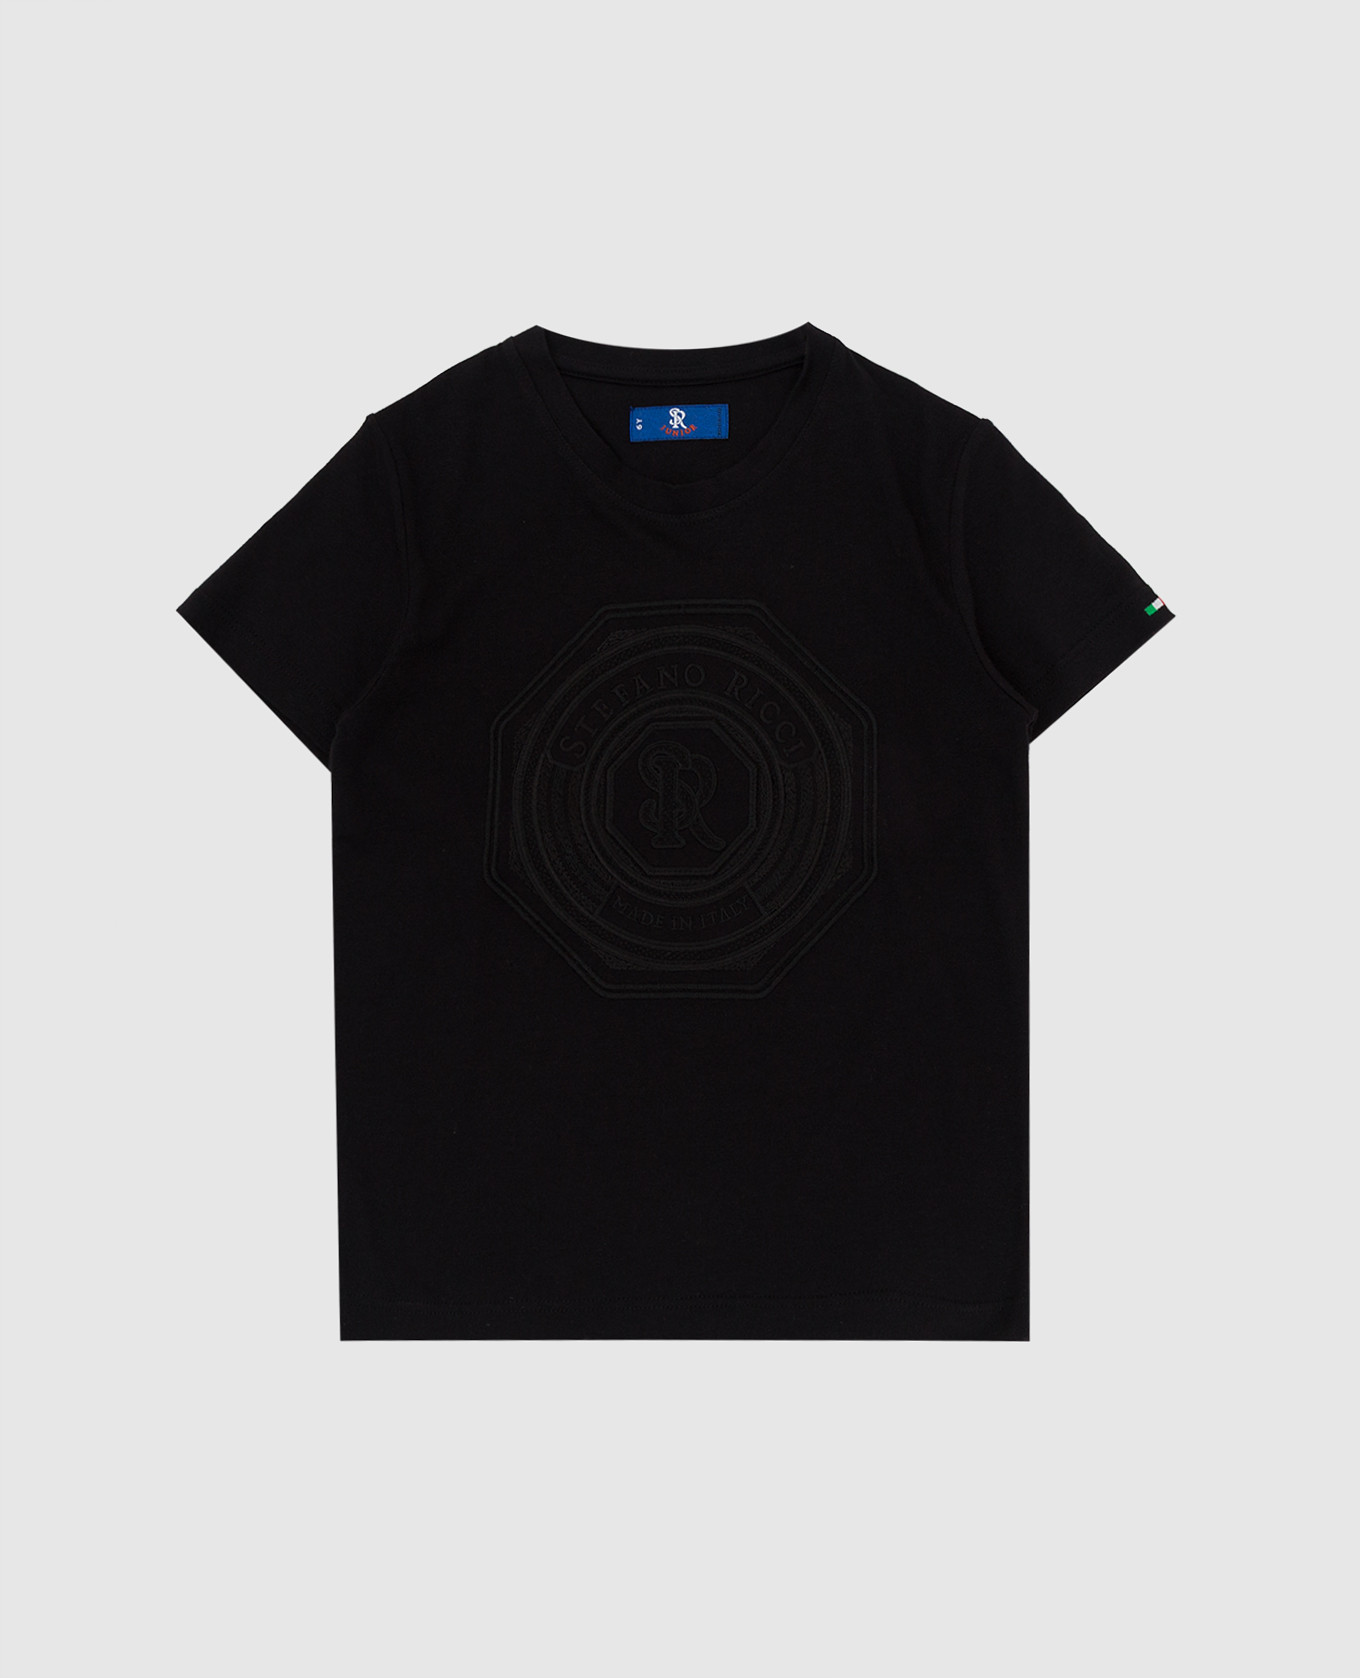 Children's black t-shirt with monogram embroidery